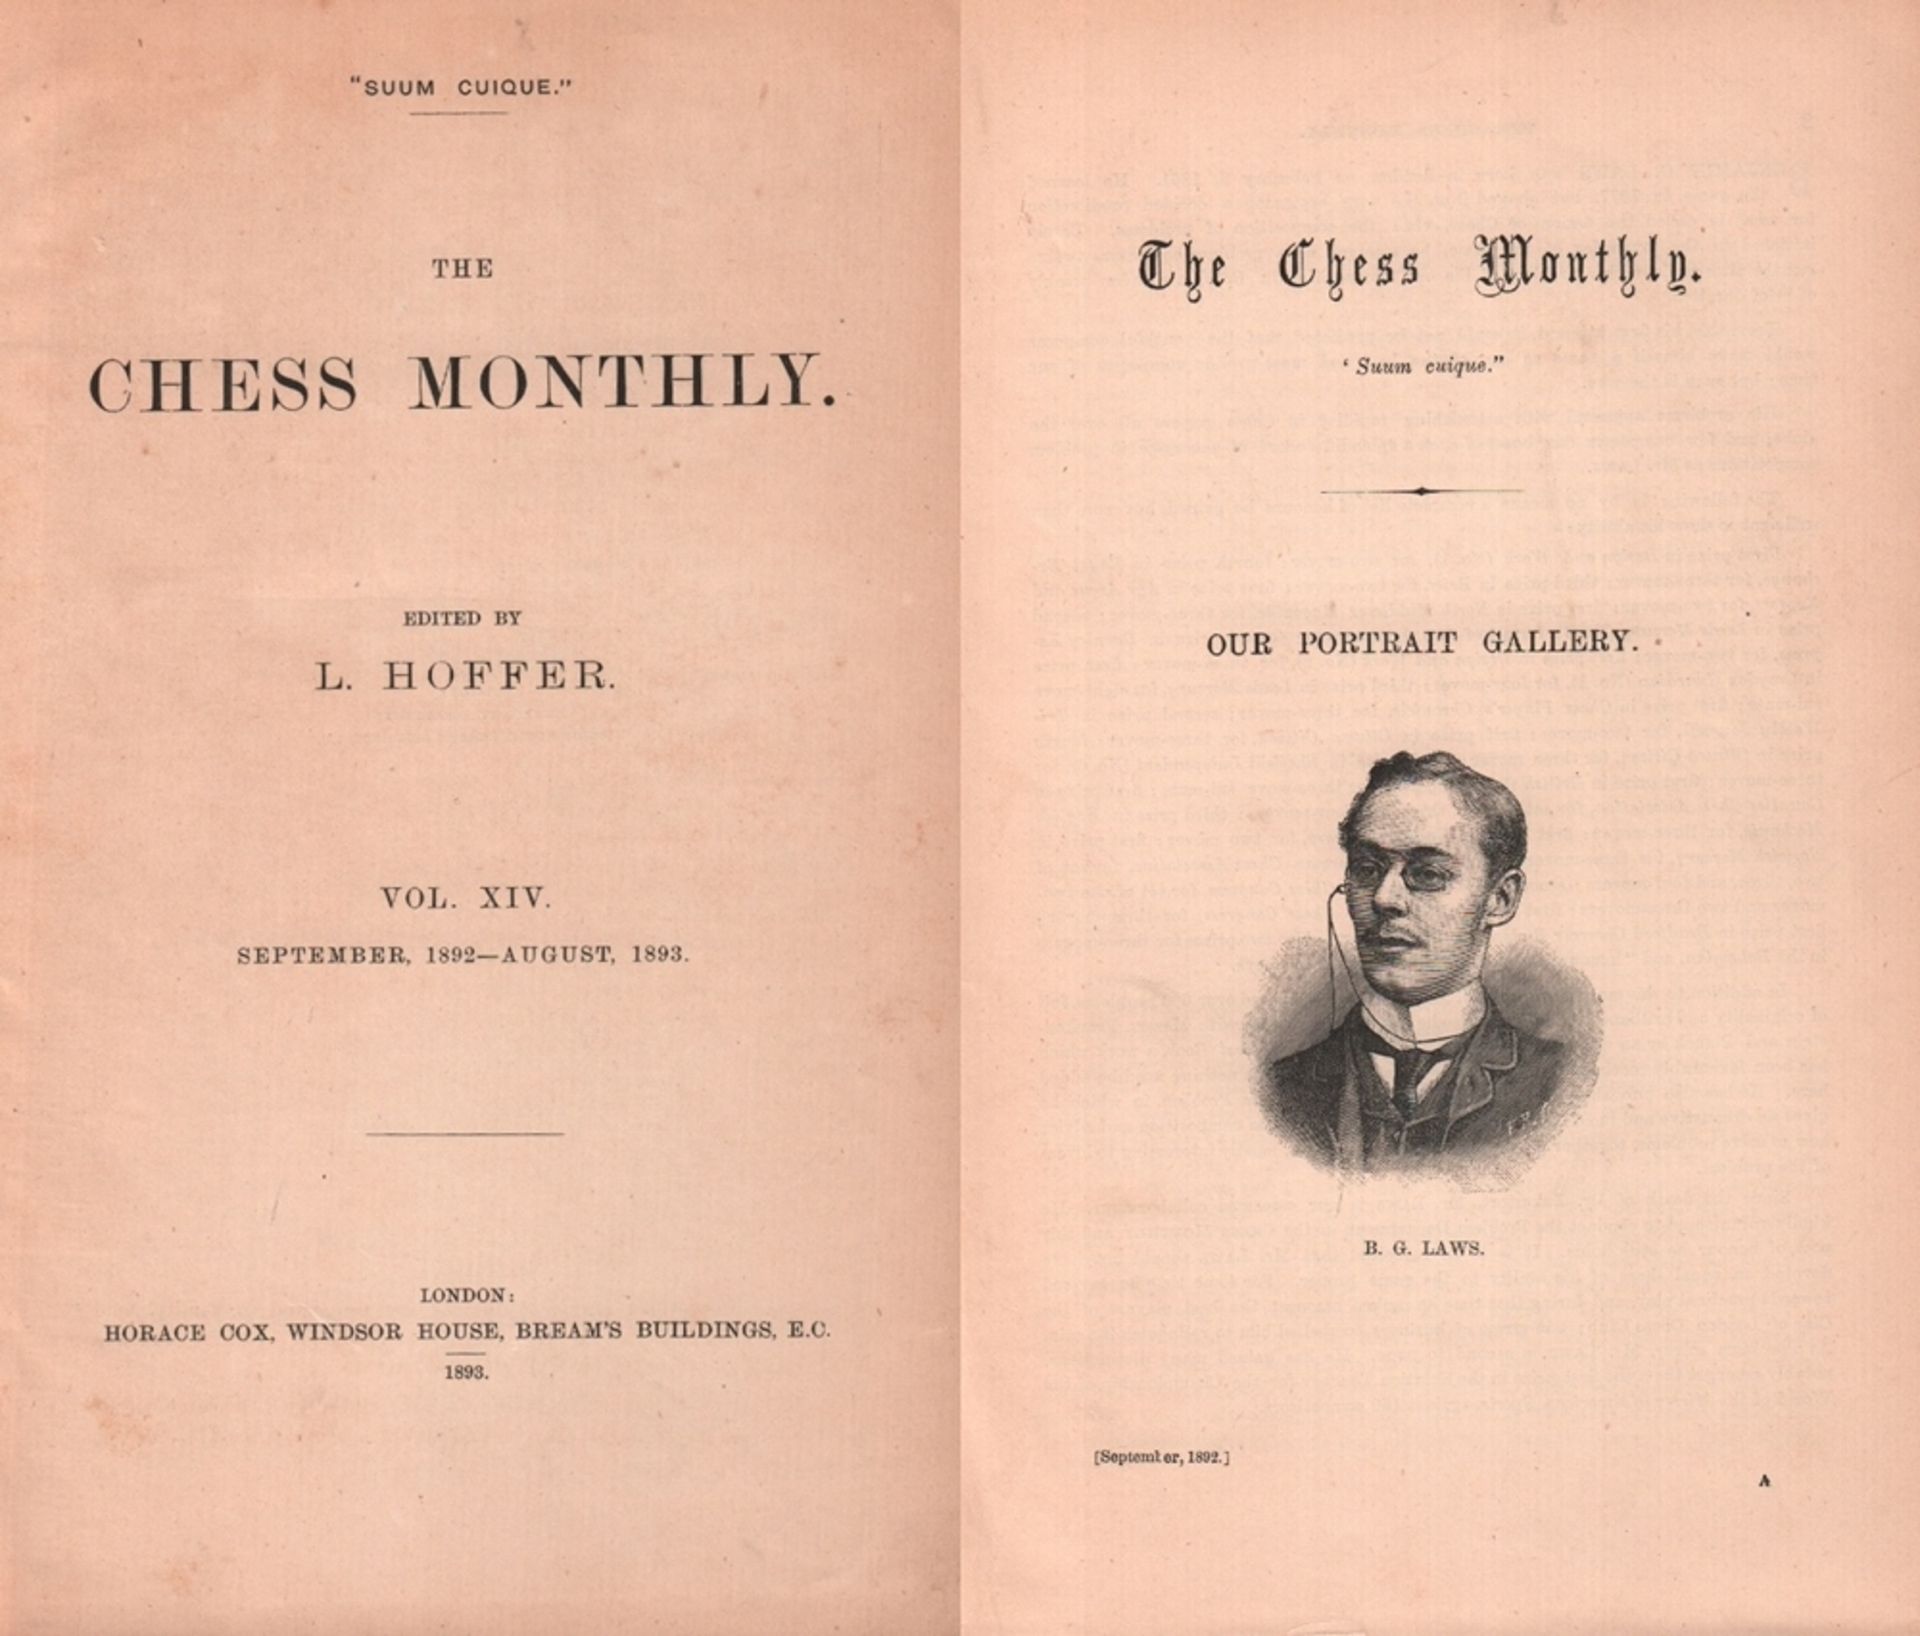 The Chess - Monthly. Edited by L. Hoffer. Volume XIV, September 1892 - August 1893. London, Cox,